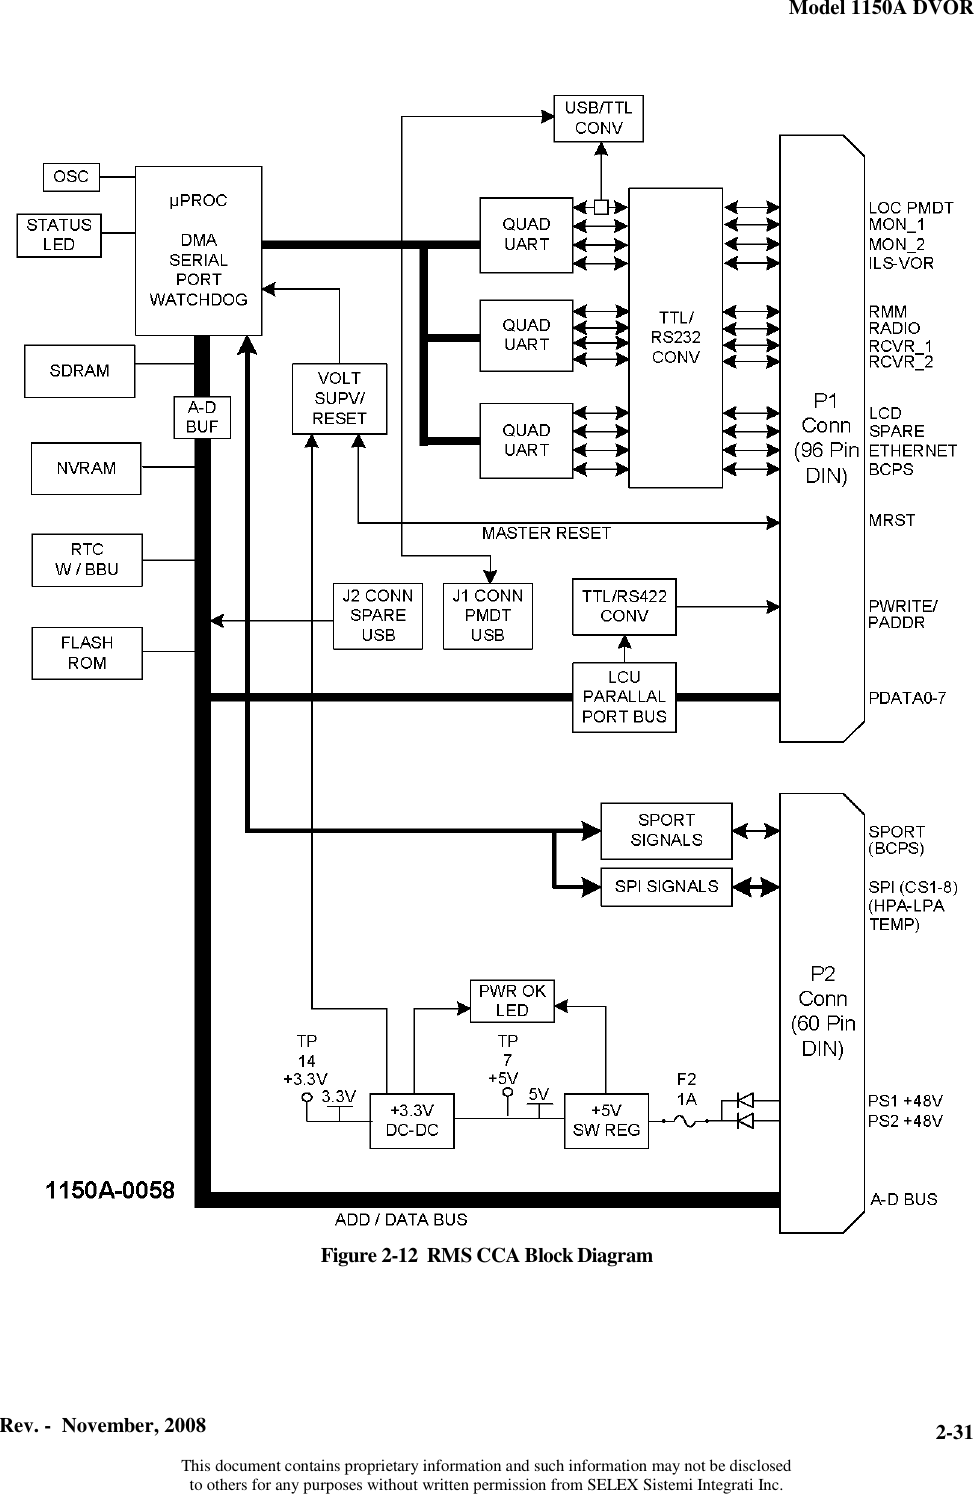 Model 1150A DVOR  Rev. -  November, 2008   This document contains proprietary information and such information may not be disclosed to others for any purposes without written permission from SELEX Sistemi Integrati Inc. 2-31Figure 2-12  RMS CCA Block Diagram  